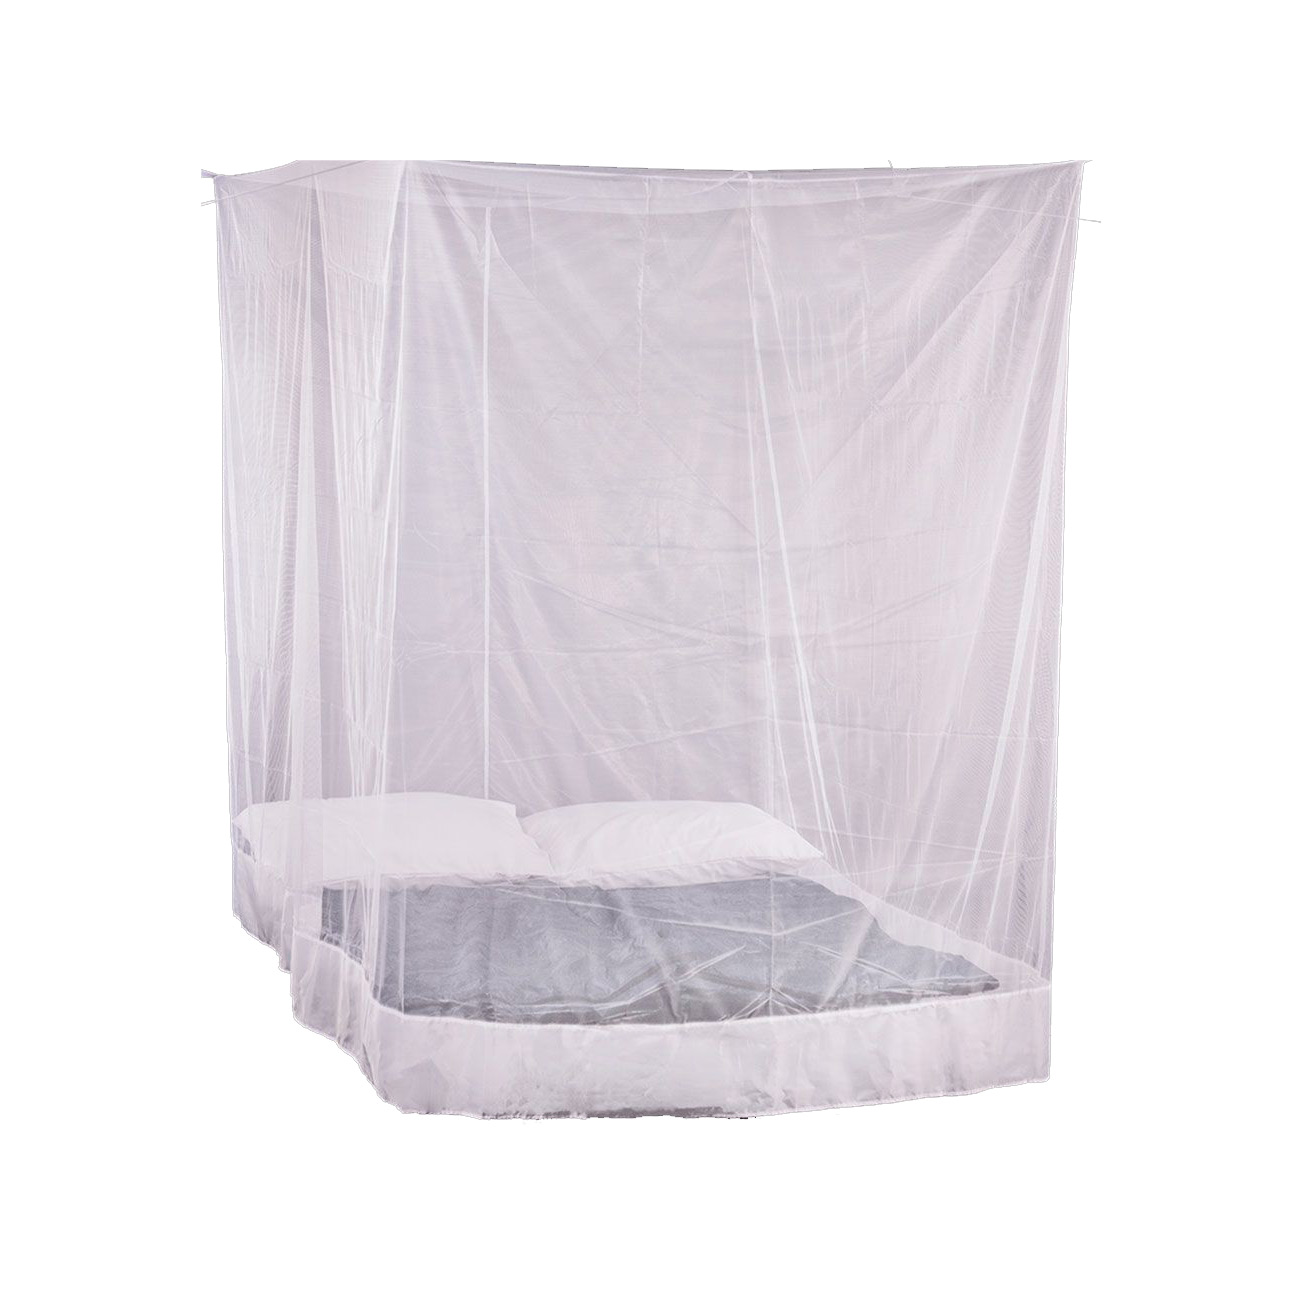 Mosquito Net Without Door, White Or Other Light Color